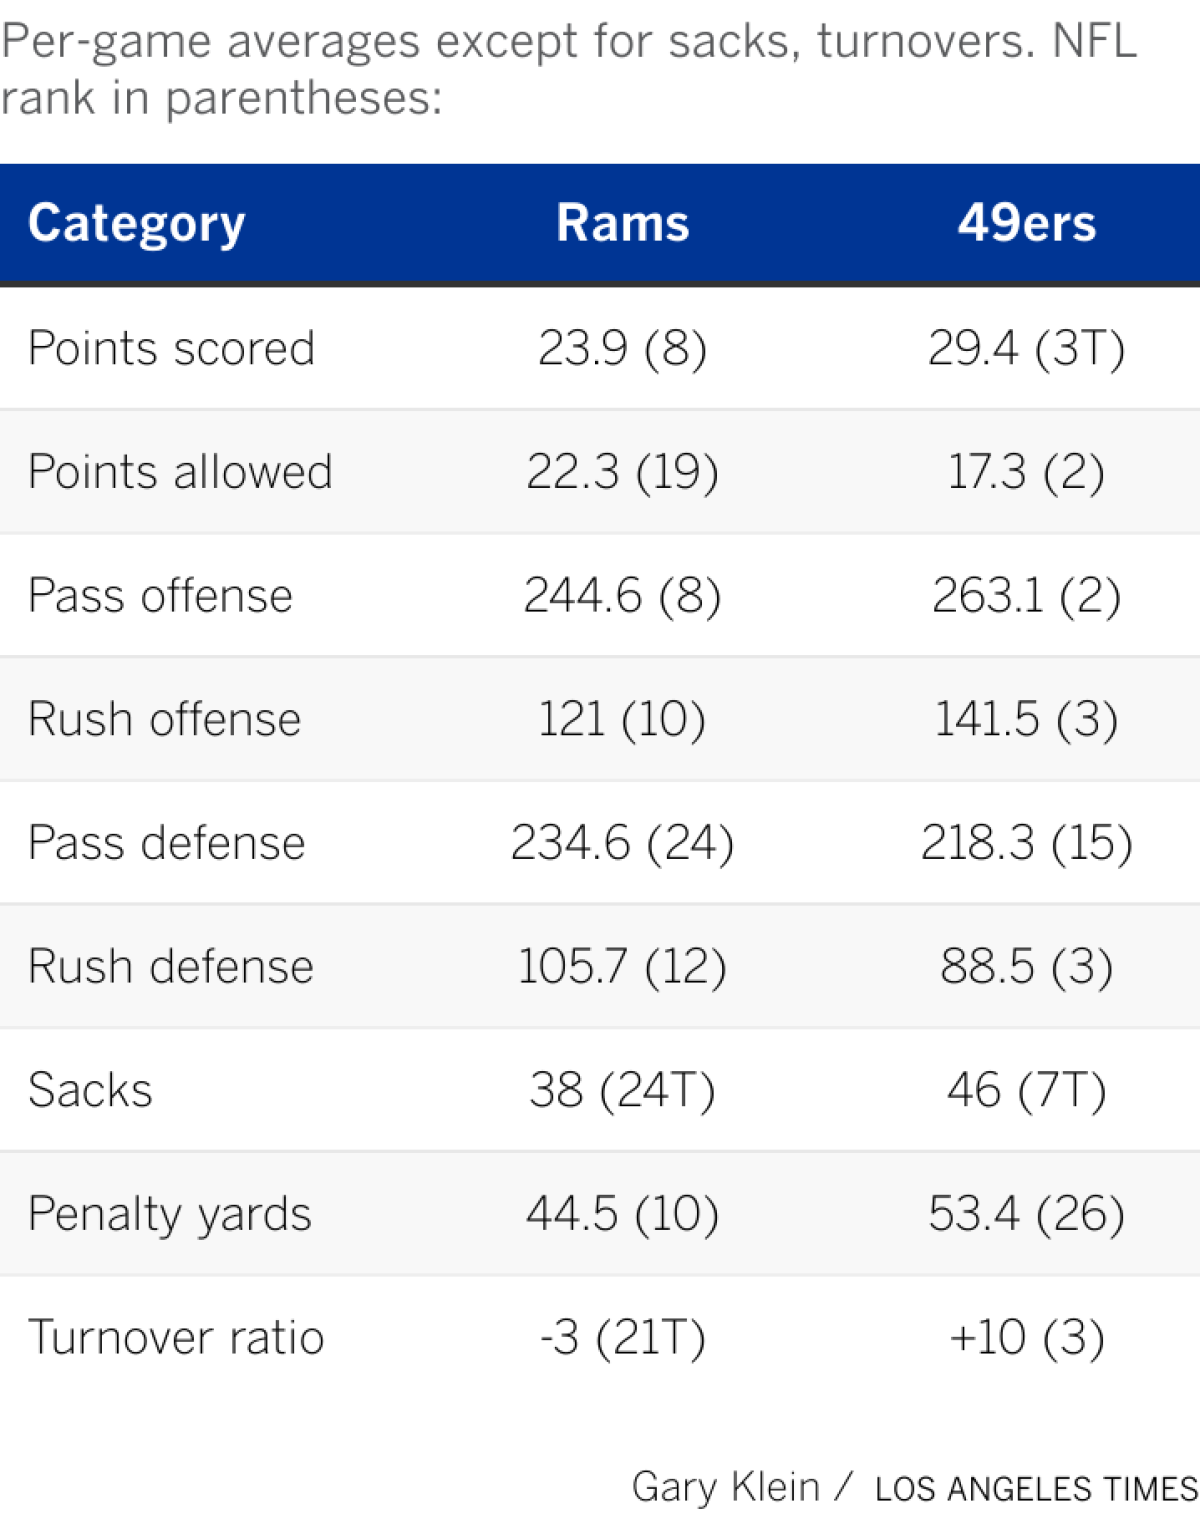 Breaking down the top team statistics for both the Rams and the 49ers.